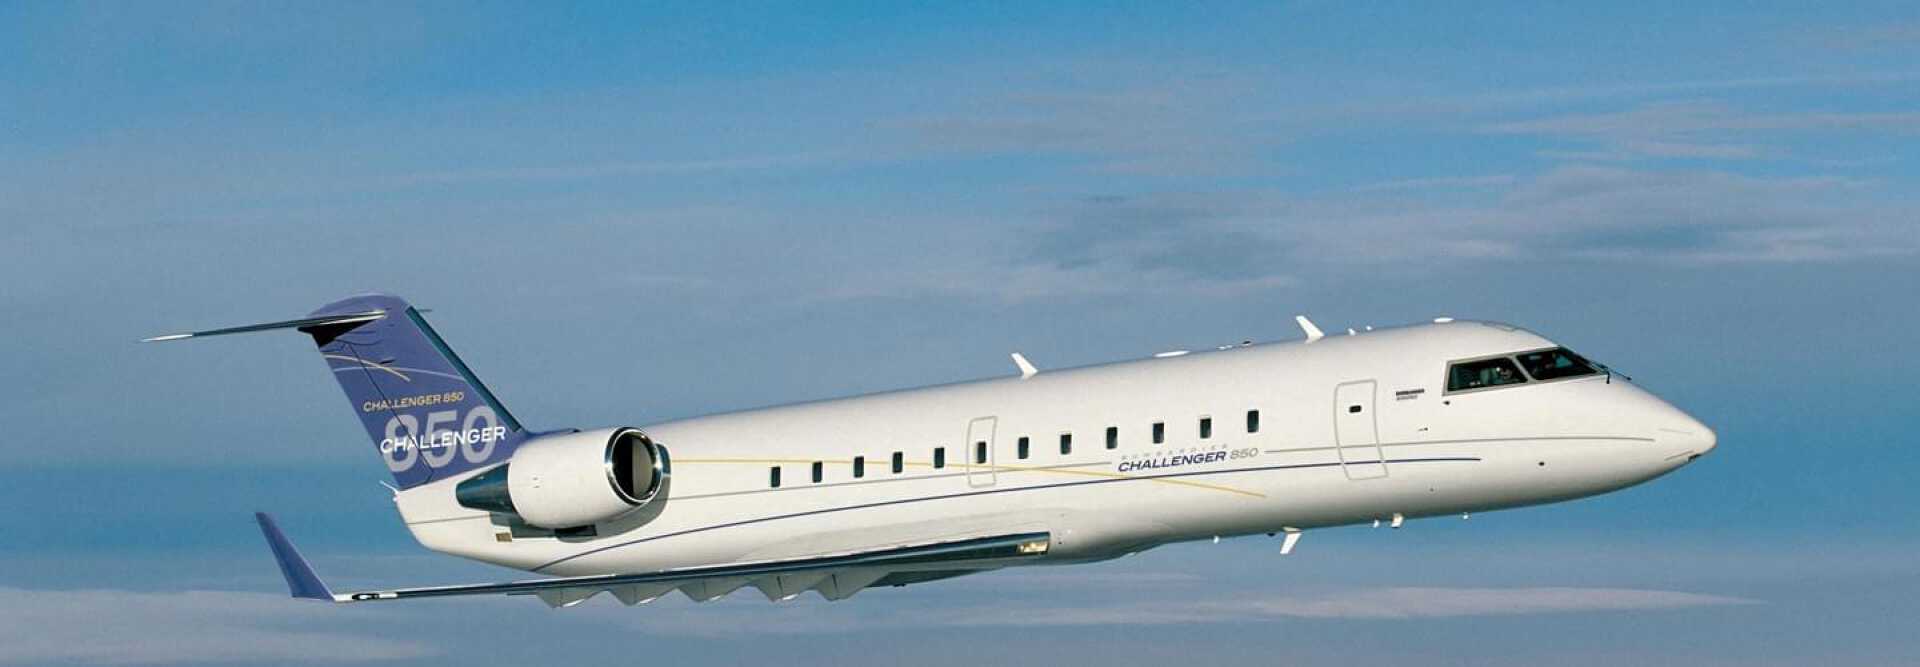 Super Large Jet Bombardier Challenger 850 available for private jet charter with LunaJets, medium-haul flights, extreme comfort, interior, efficiency